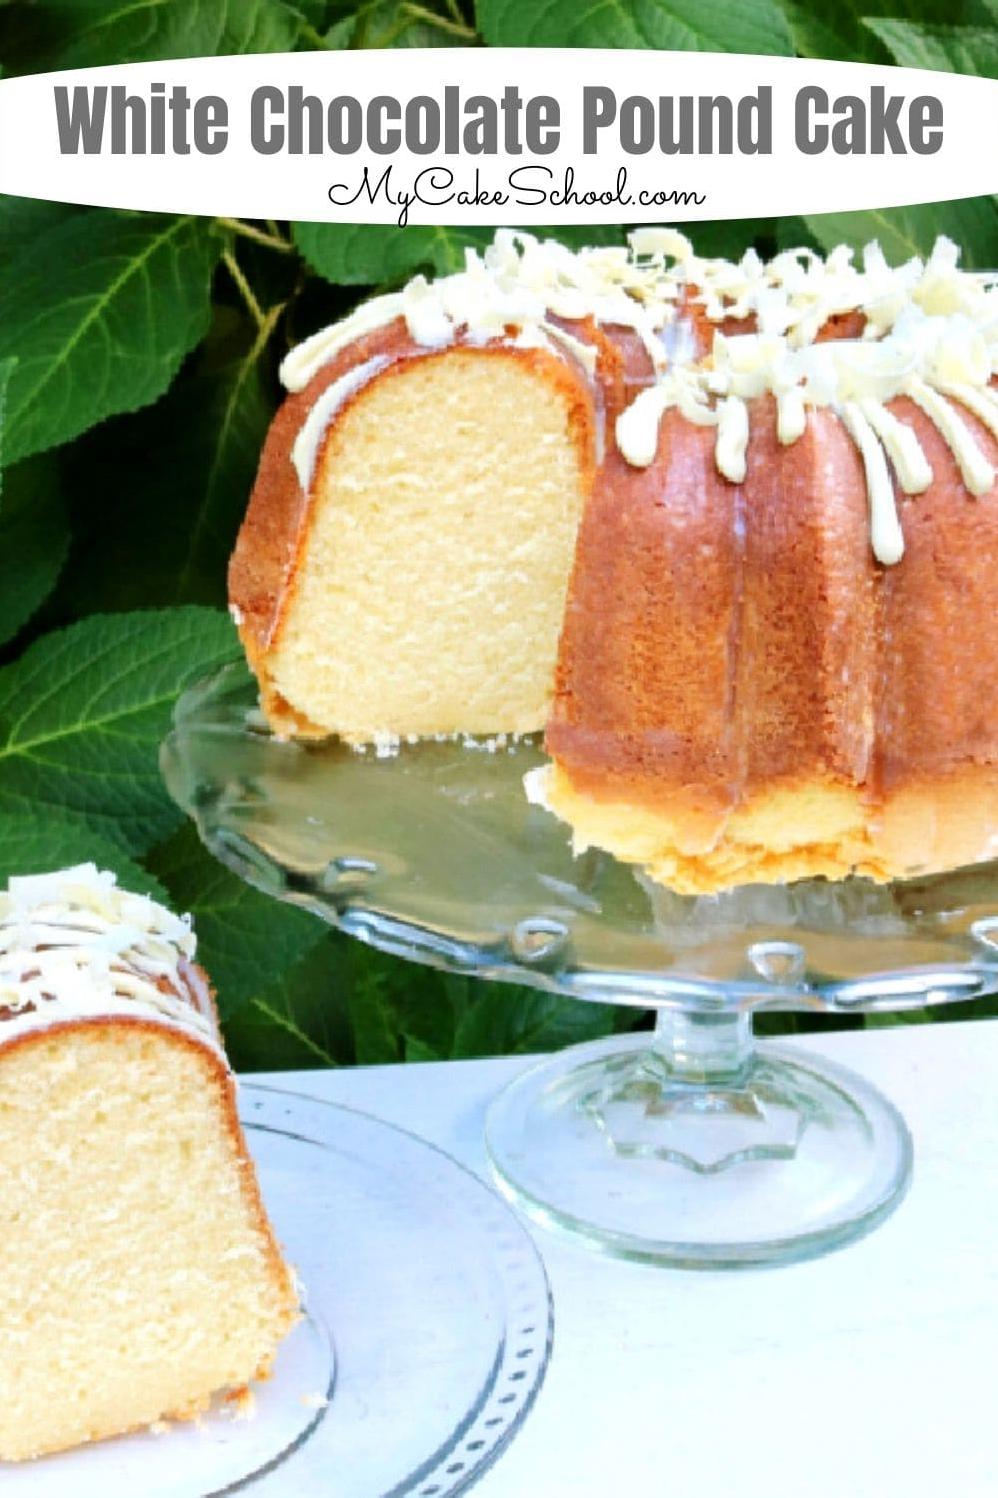  Satisfy your sweet tooth cravings with this delicious pound cake.